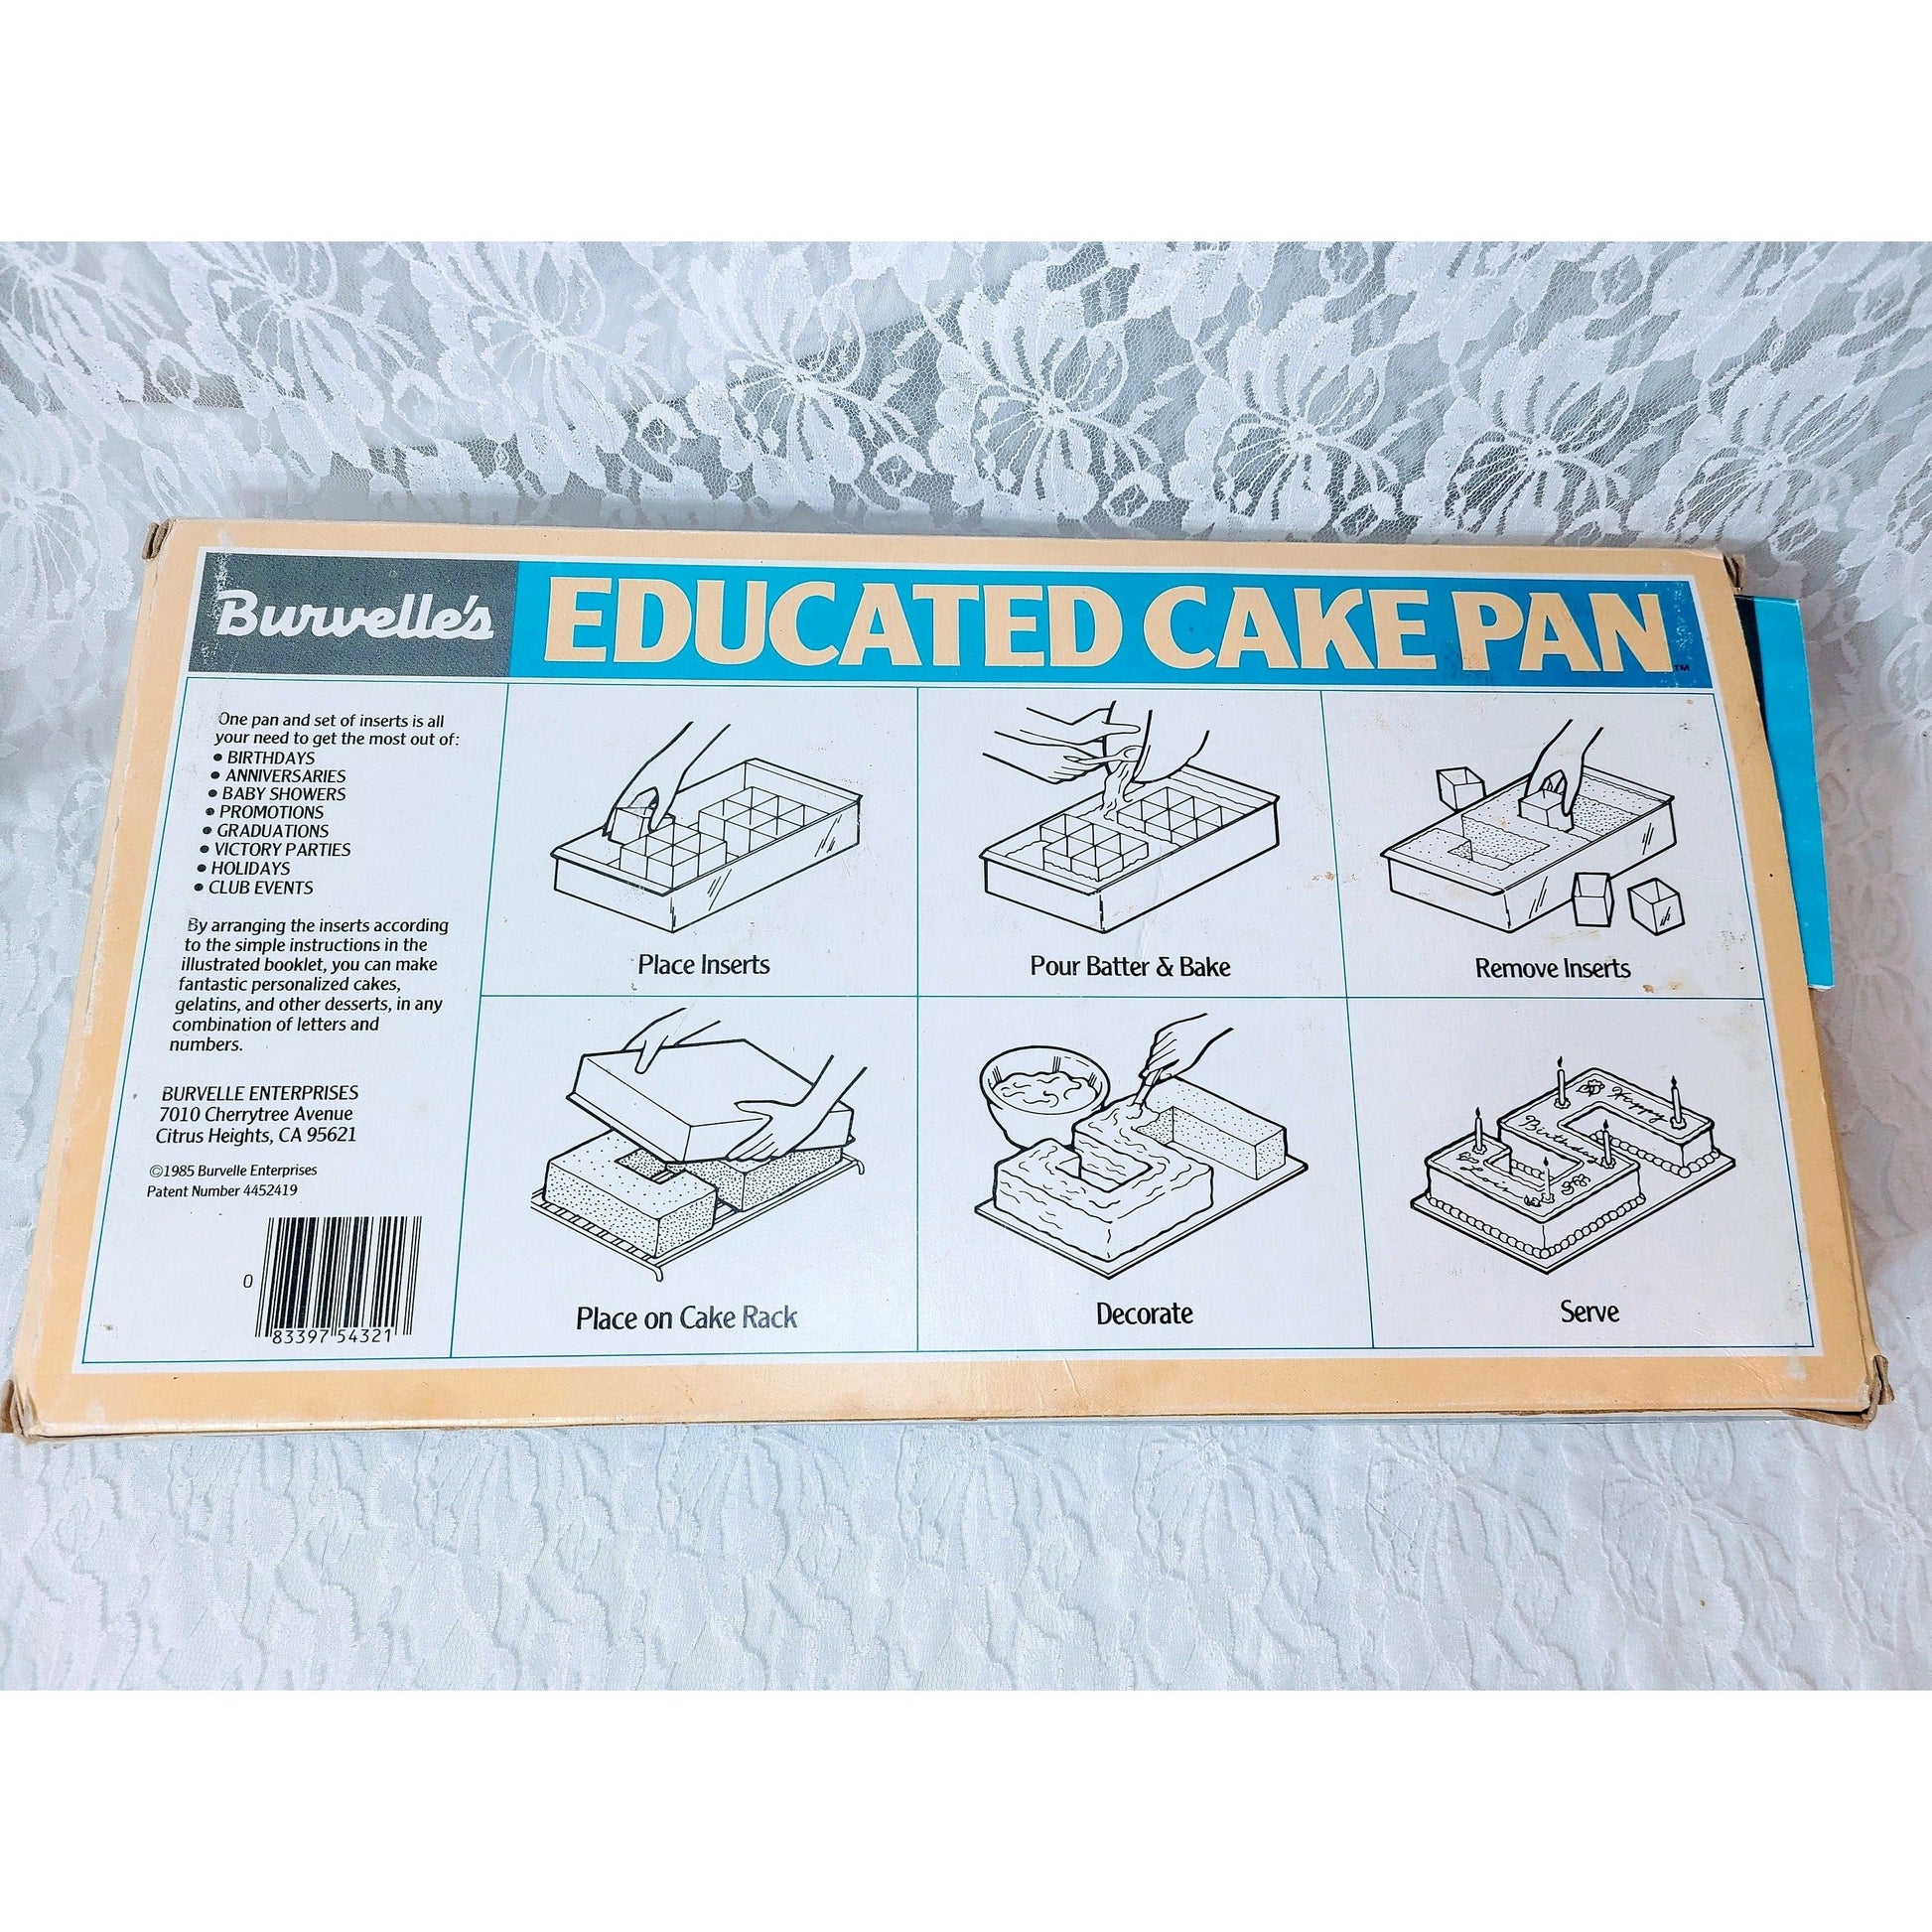 Burvelles Educated Cake Pan Metal Letters Numbers Custom Cakes ~ Vintage 1982 Cake Mold Pan Tin ~ Baking Supplies ~ Comes with Instructions!